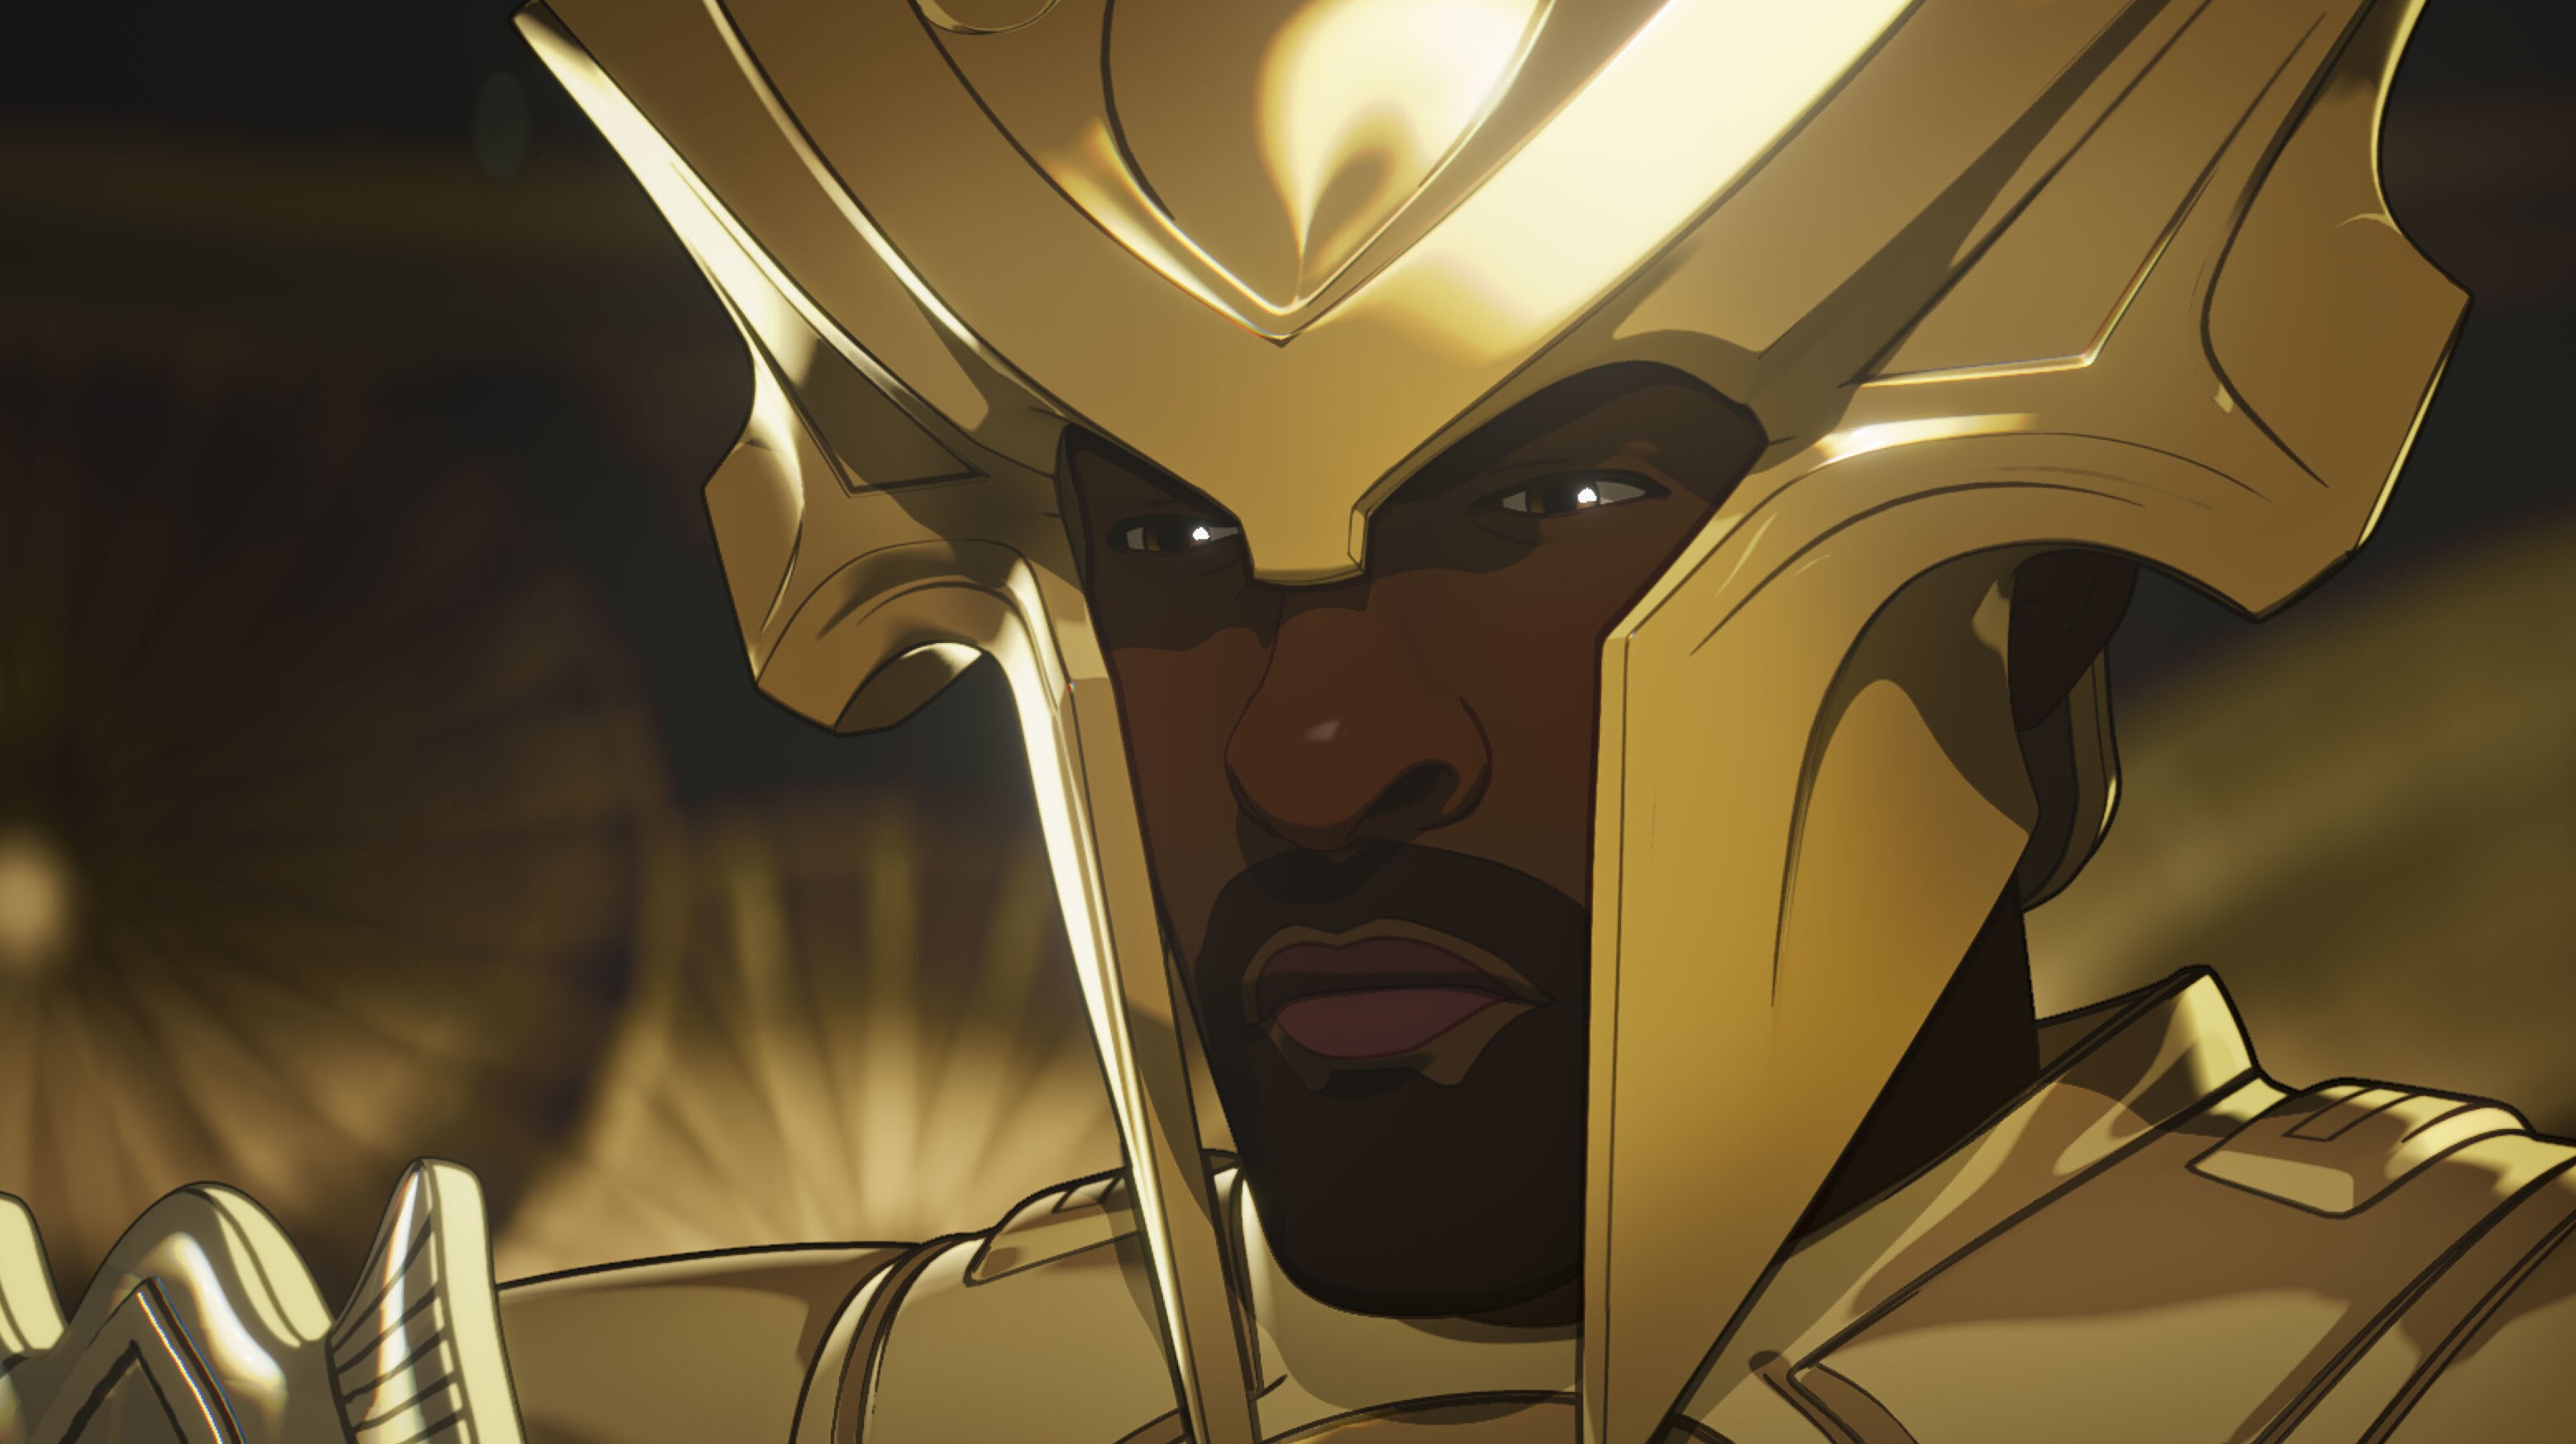 Heimdall in Marvel Studios' WHAT IF…? exclusively on Disney+. ©Marvel Studios 2021. All Rights Reserved.